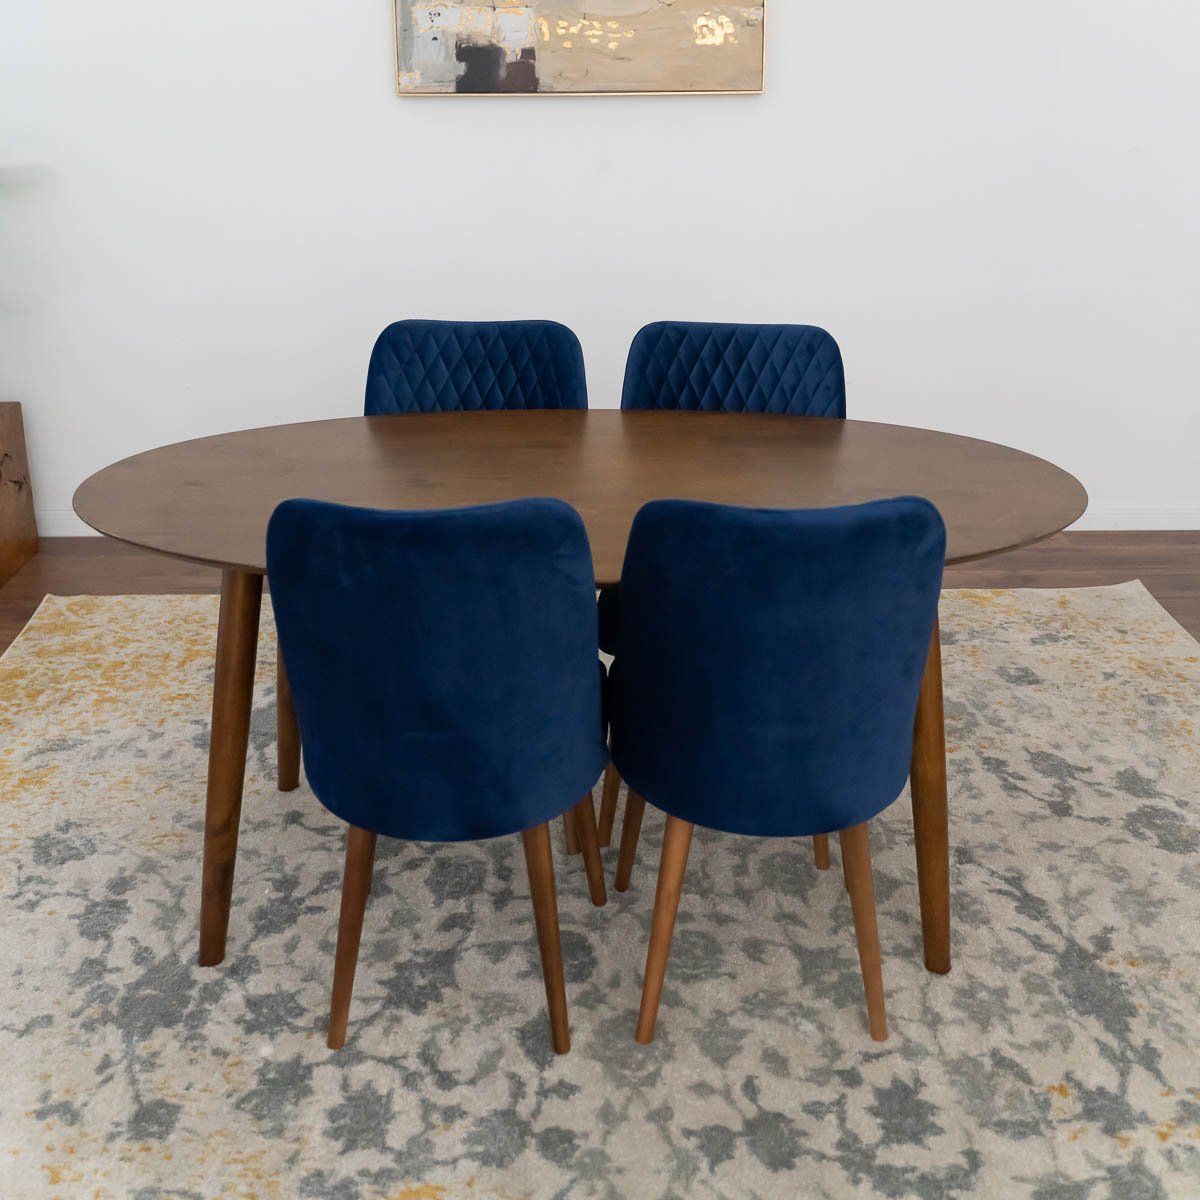 Rixos Dining set - 4 Evette Blue Dining Chairs Walnut | MidinMod | TX | Best Furniture stores in Houston